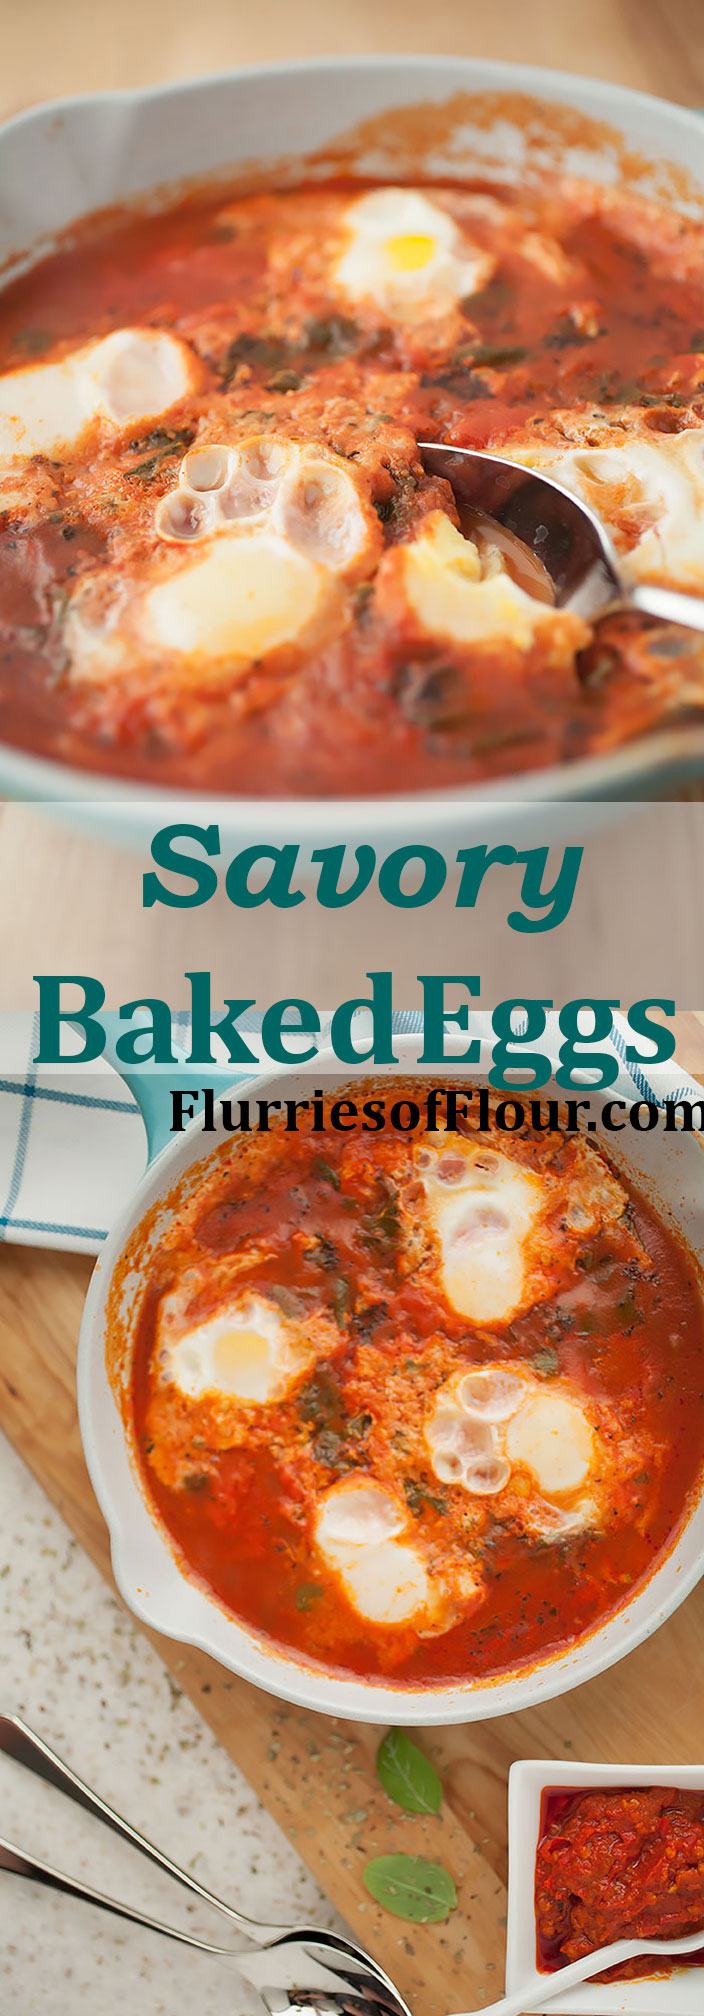 Silky, just-set eggs nestled in a savory tomato sauce with some wilted greens and Parmesan melted and just beginning to brown on top—these savory baked eggs are heaven! They’re also done in under 30 minutes for a quick, healthy breakfast, lunch, or dinner! 